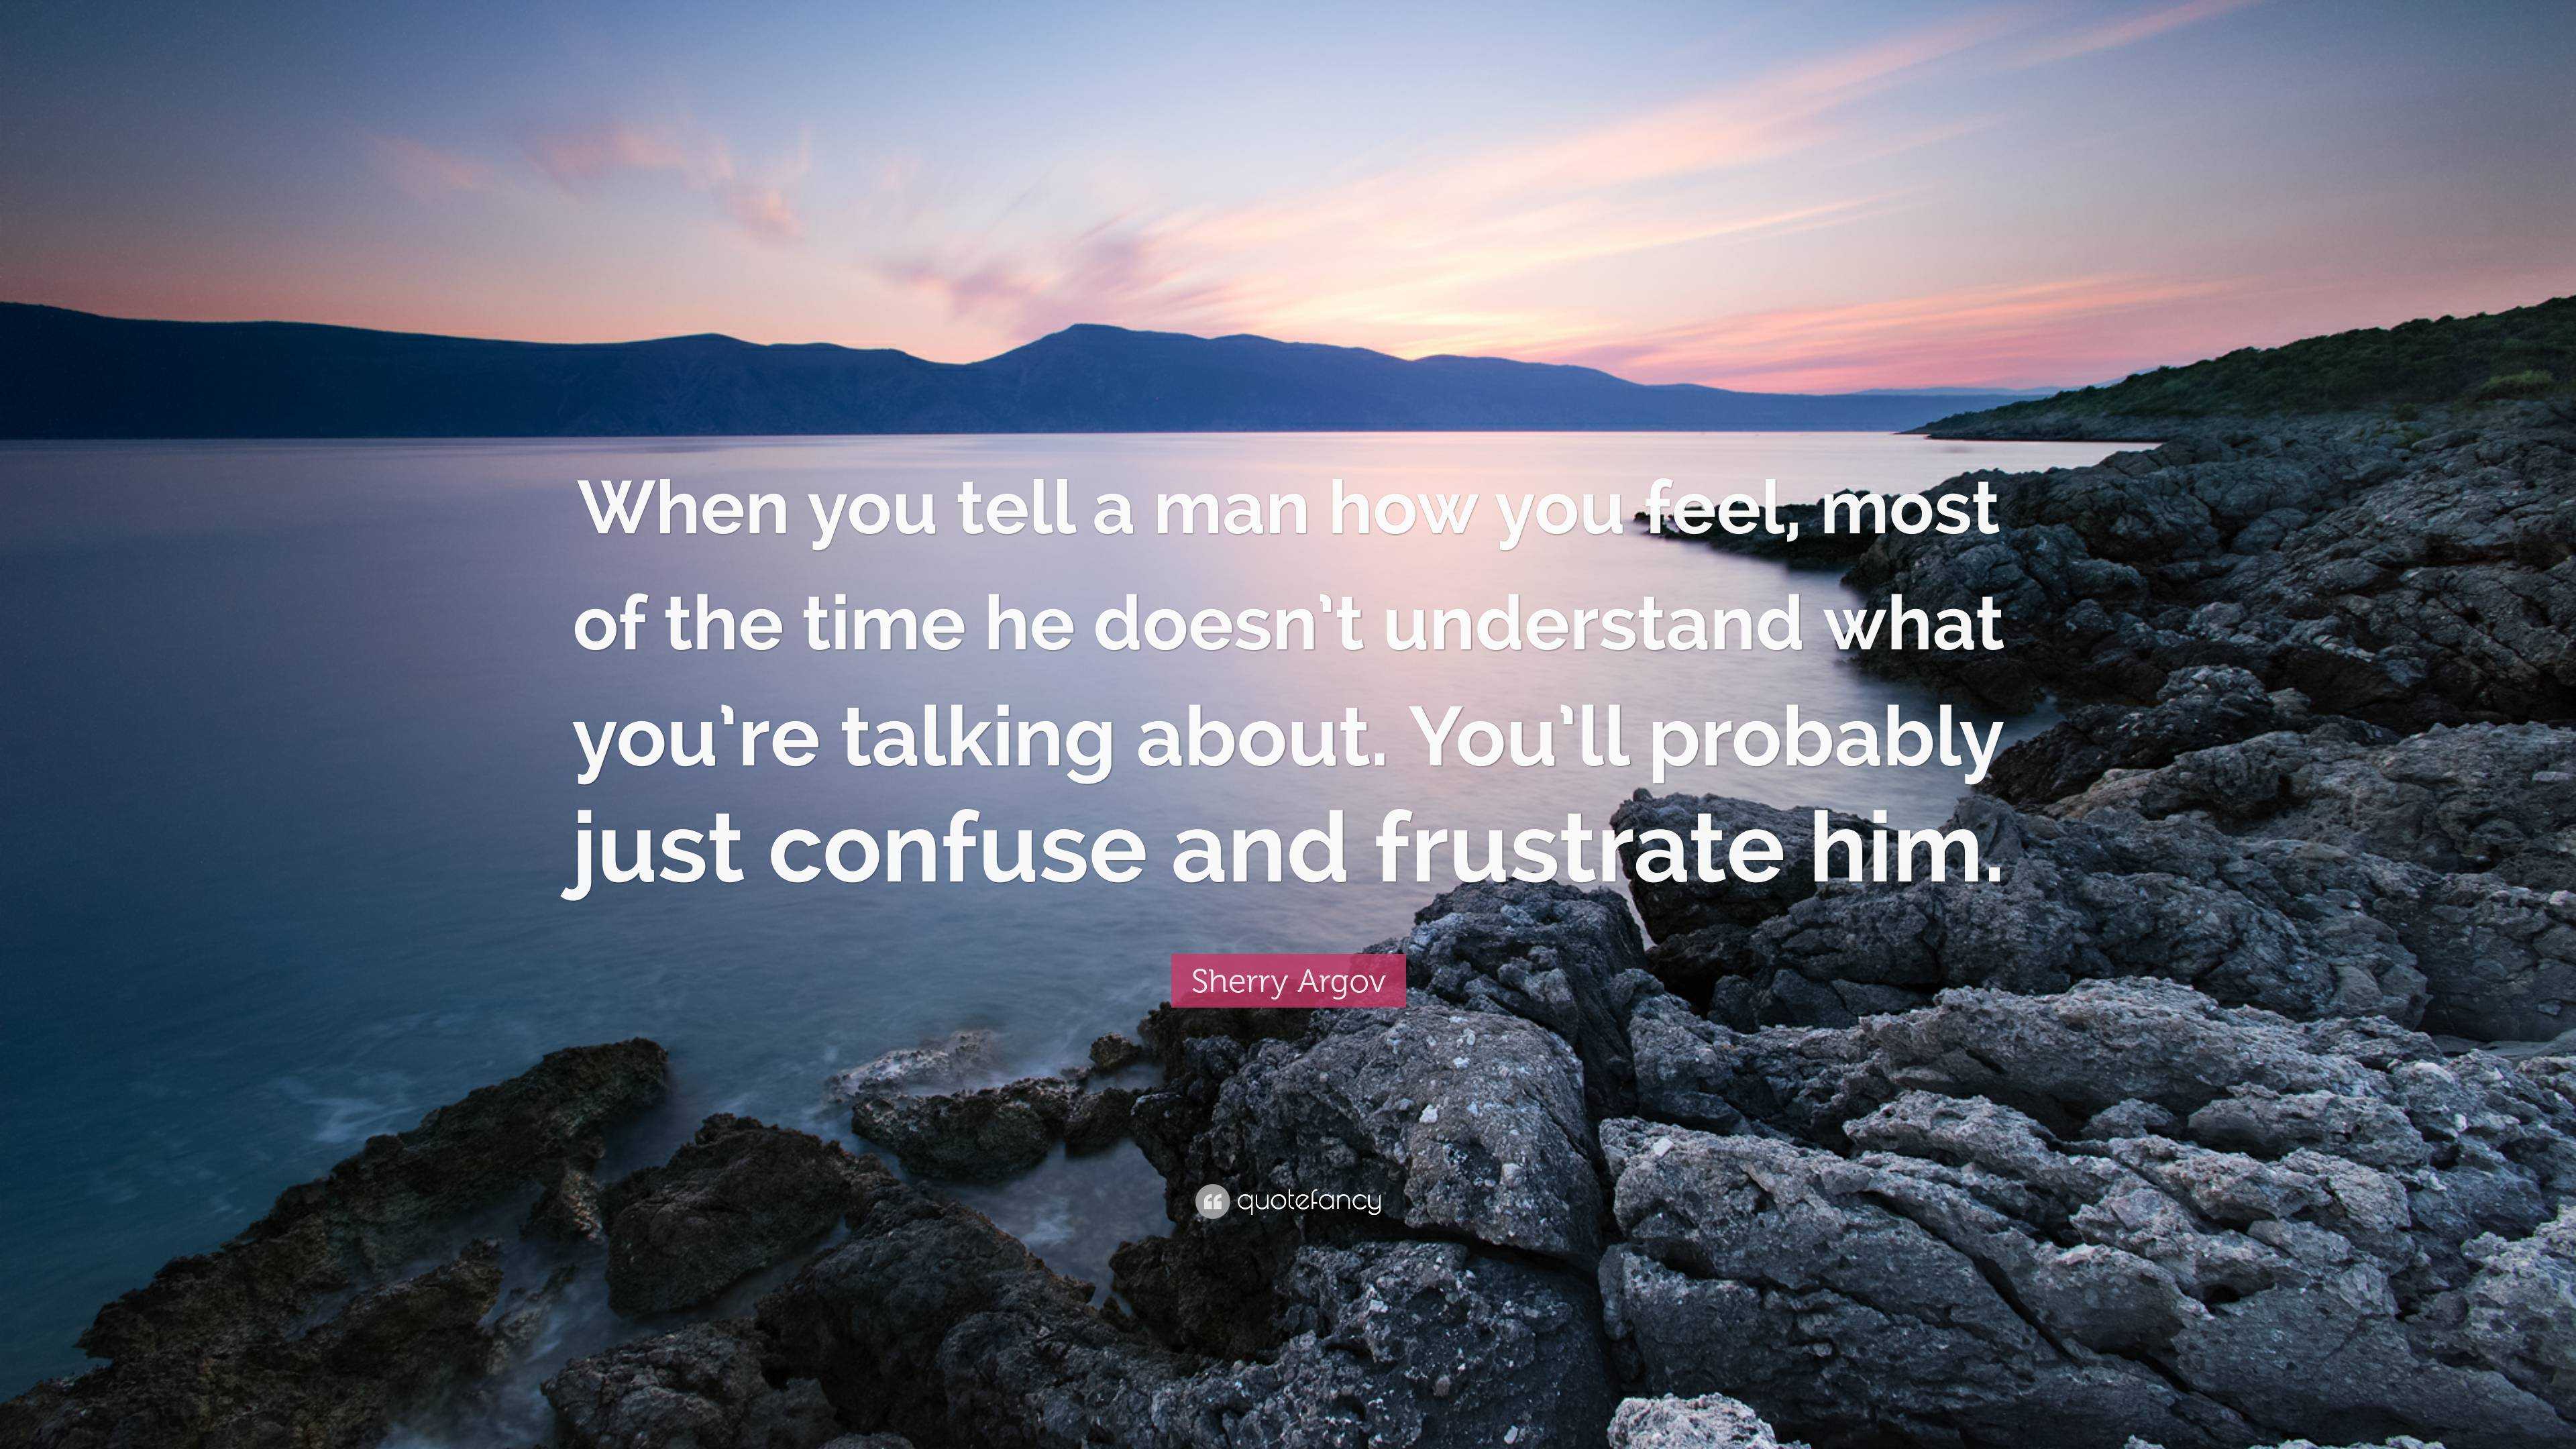 Sherry Argov Quote: “When you tell a man how you feel, most of the time ...